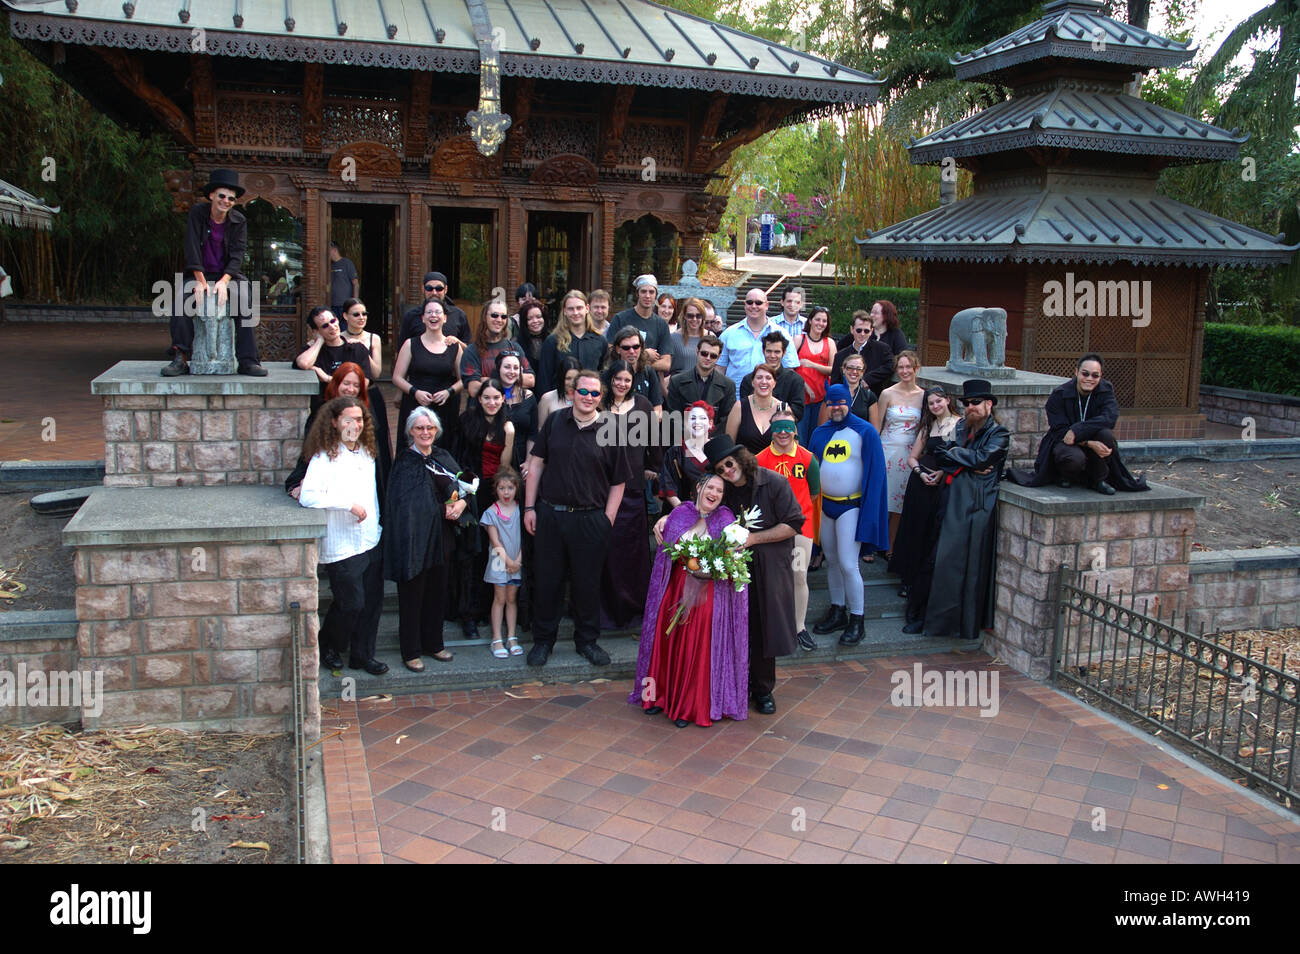 Group Of Goths At Discordian Wedding 7272 Stock Photo Alamy